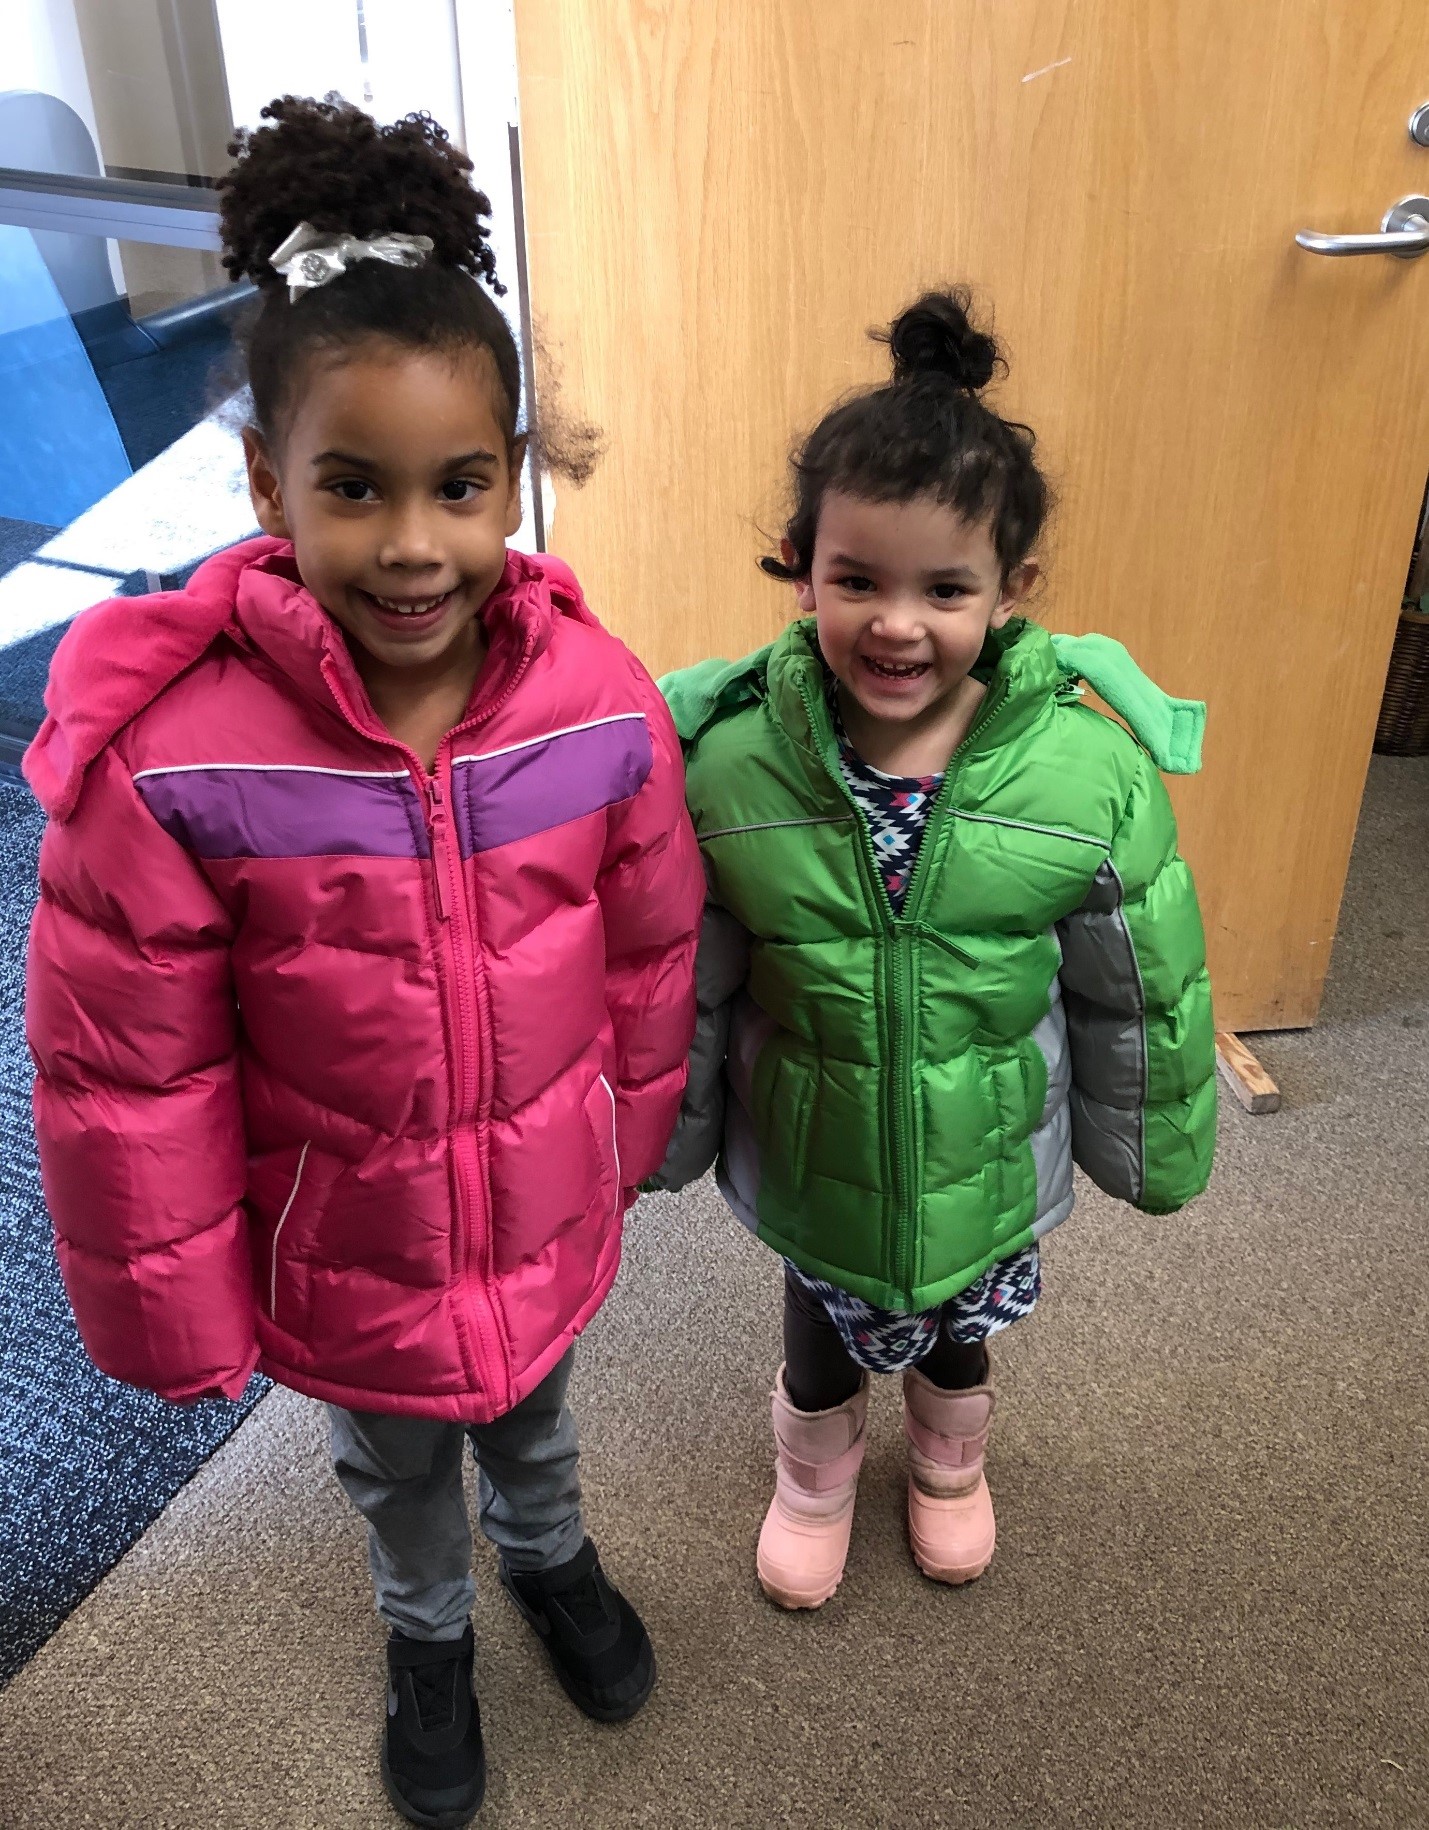 Coats for Kids once again spreading warmth this winter - Sault Ste. Marie  News